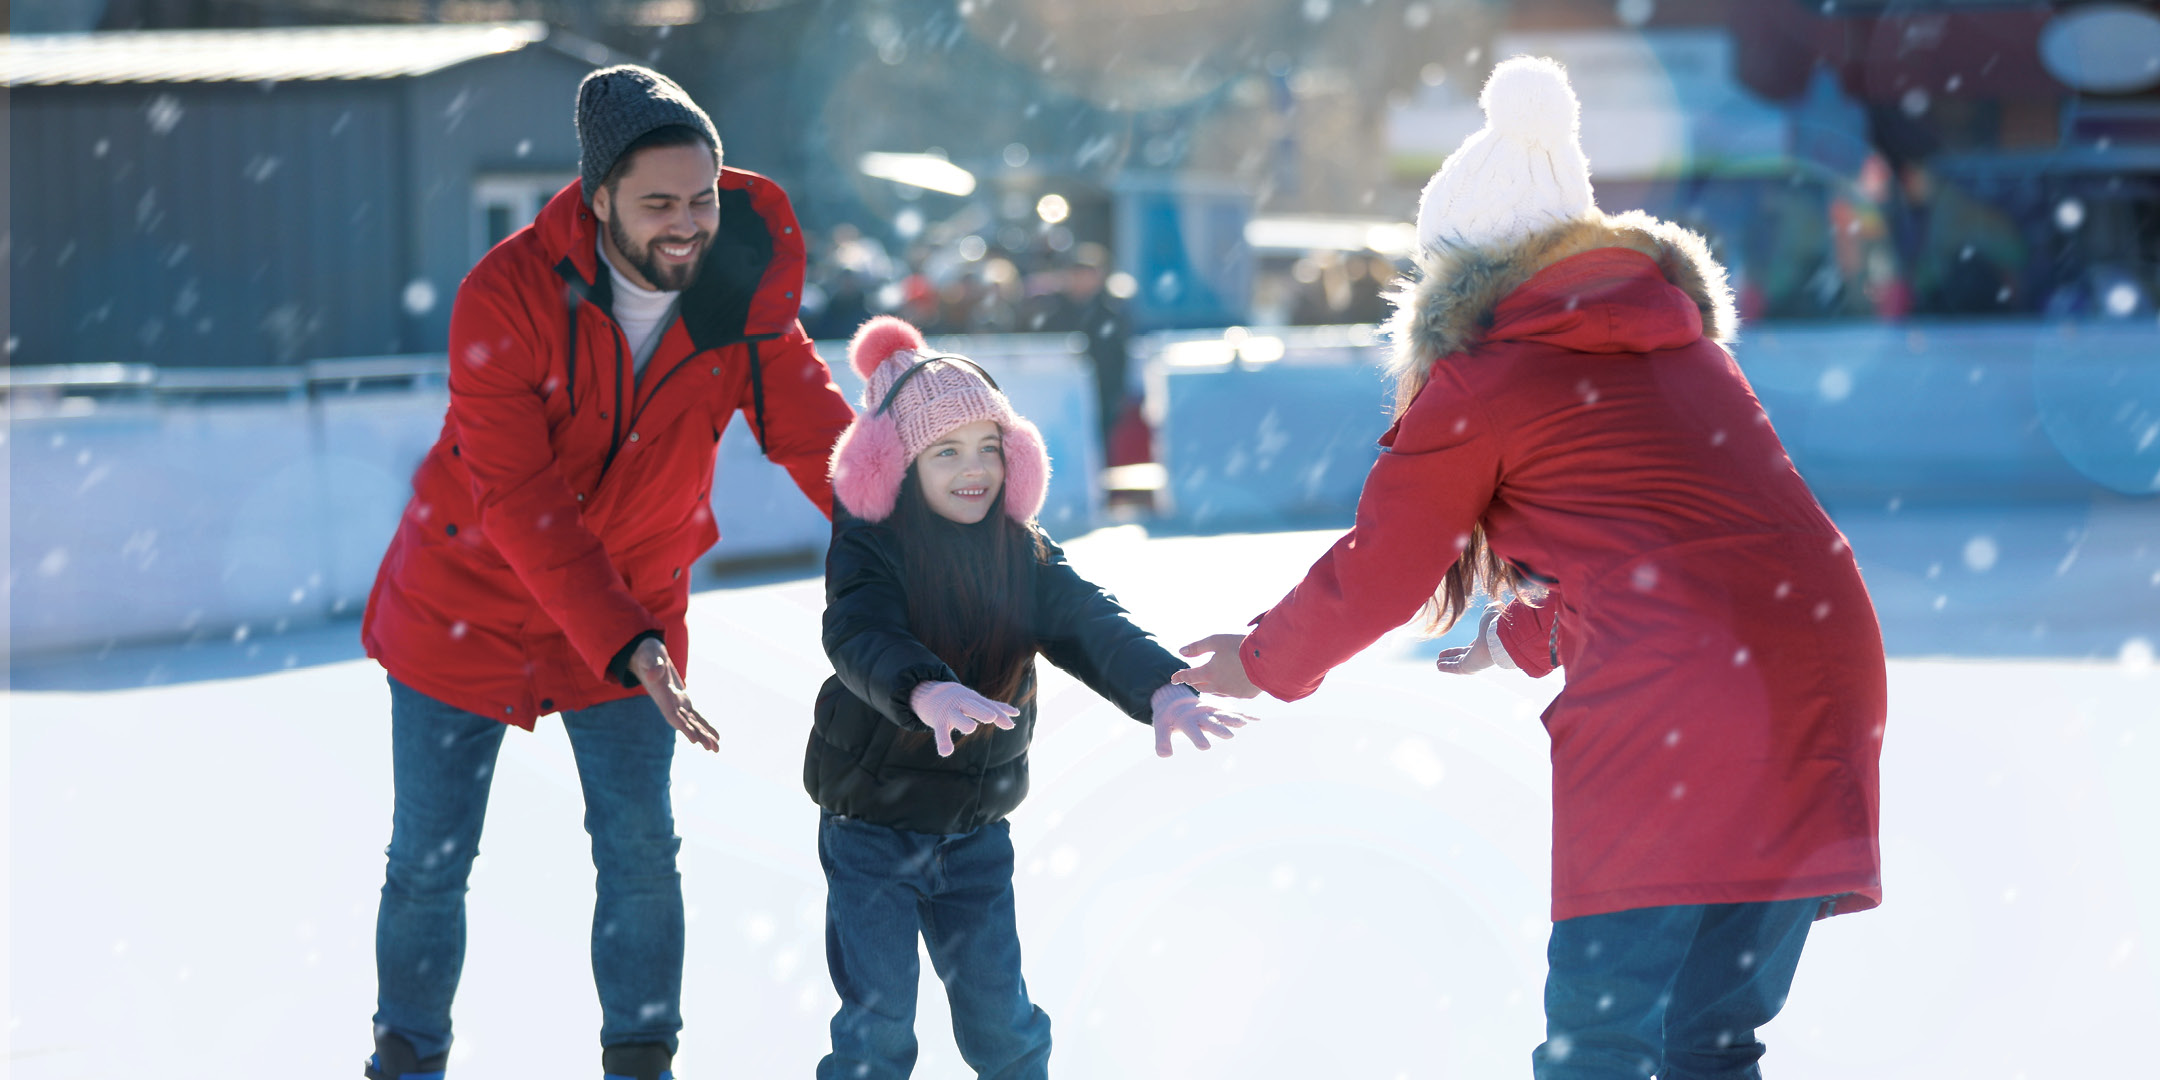 A family of three skating on an outdoor skating rink together.